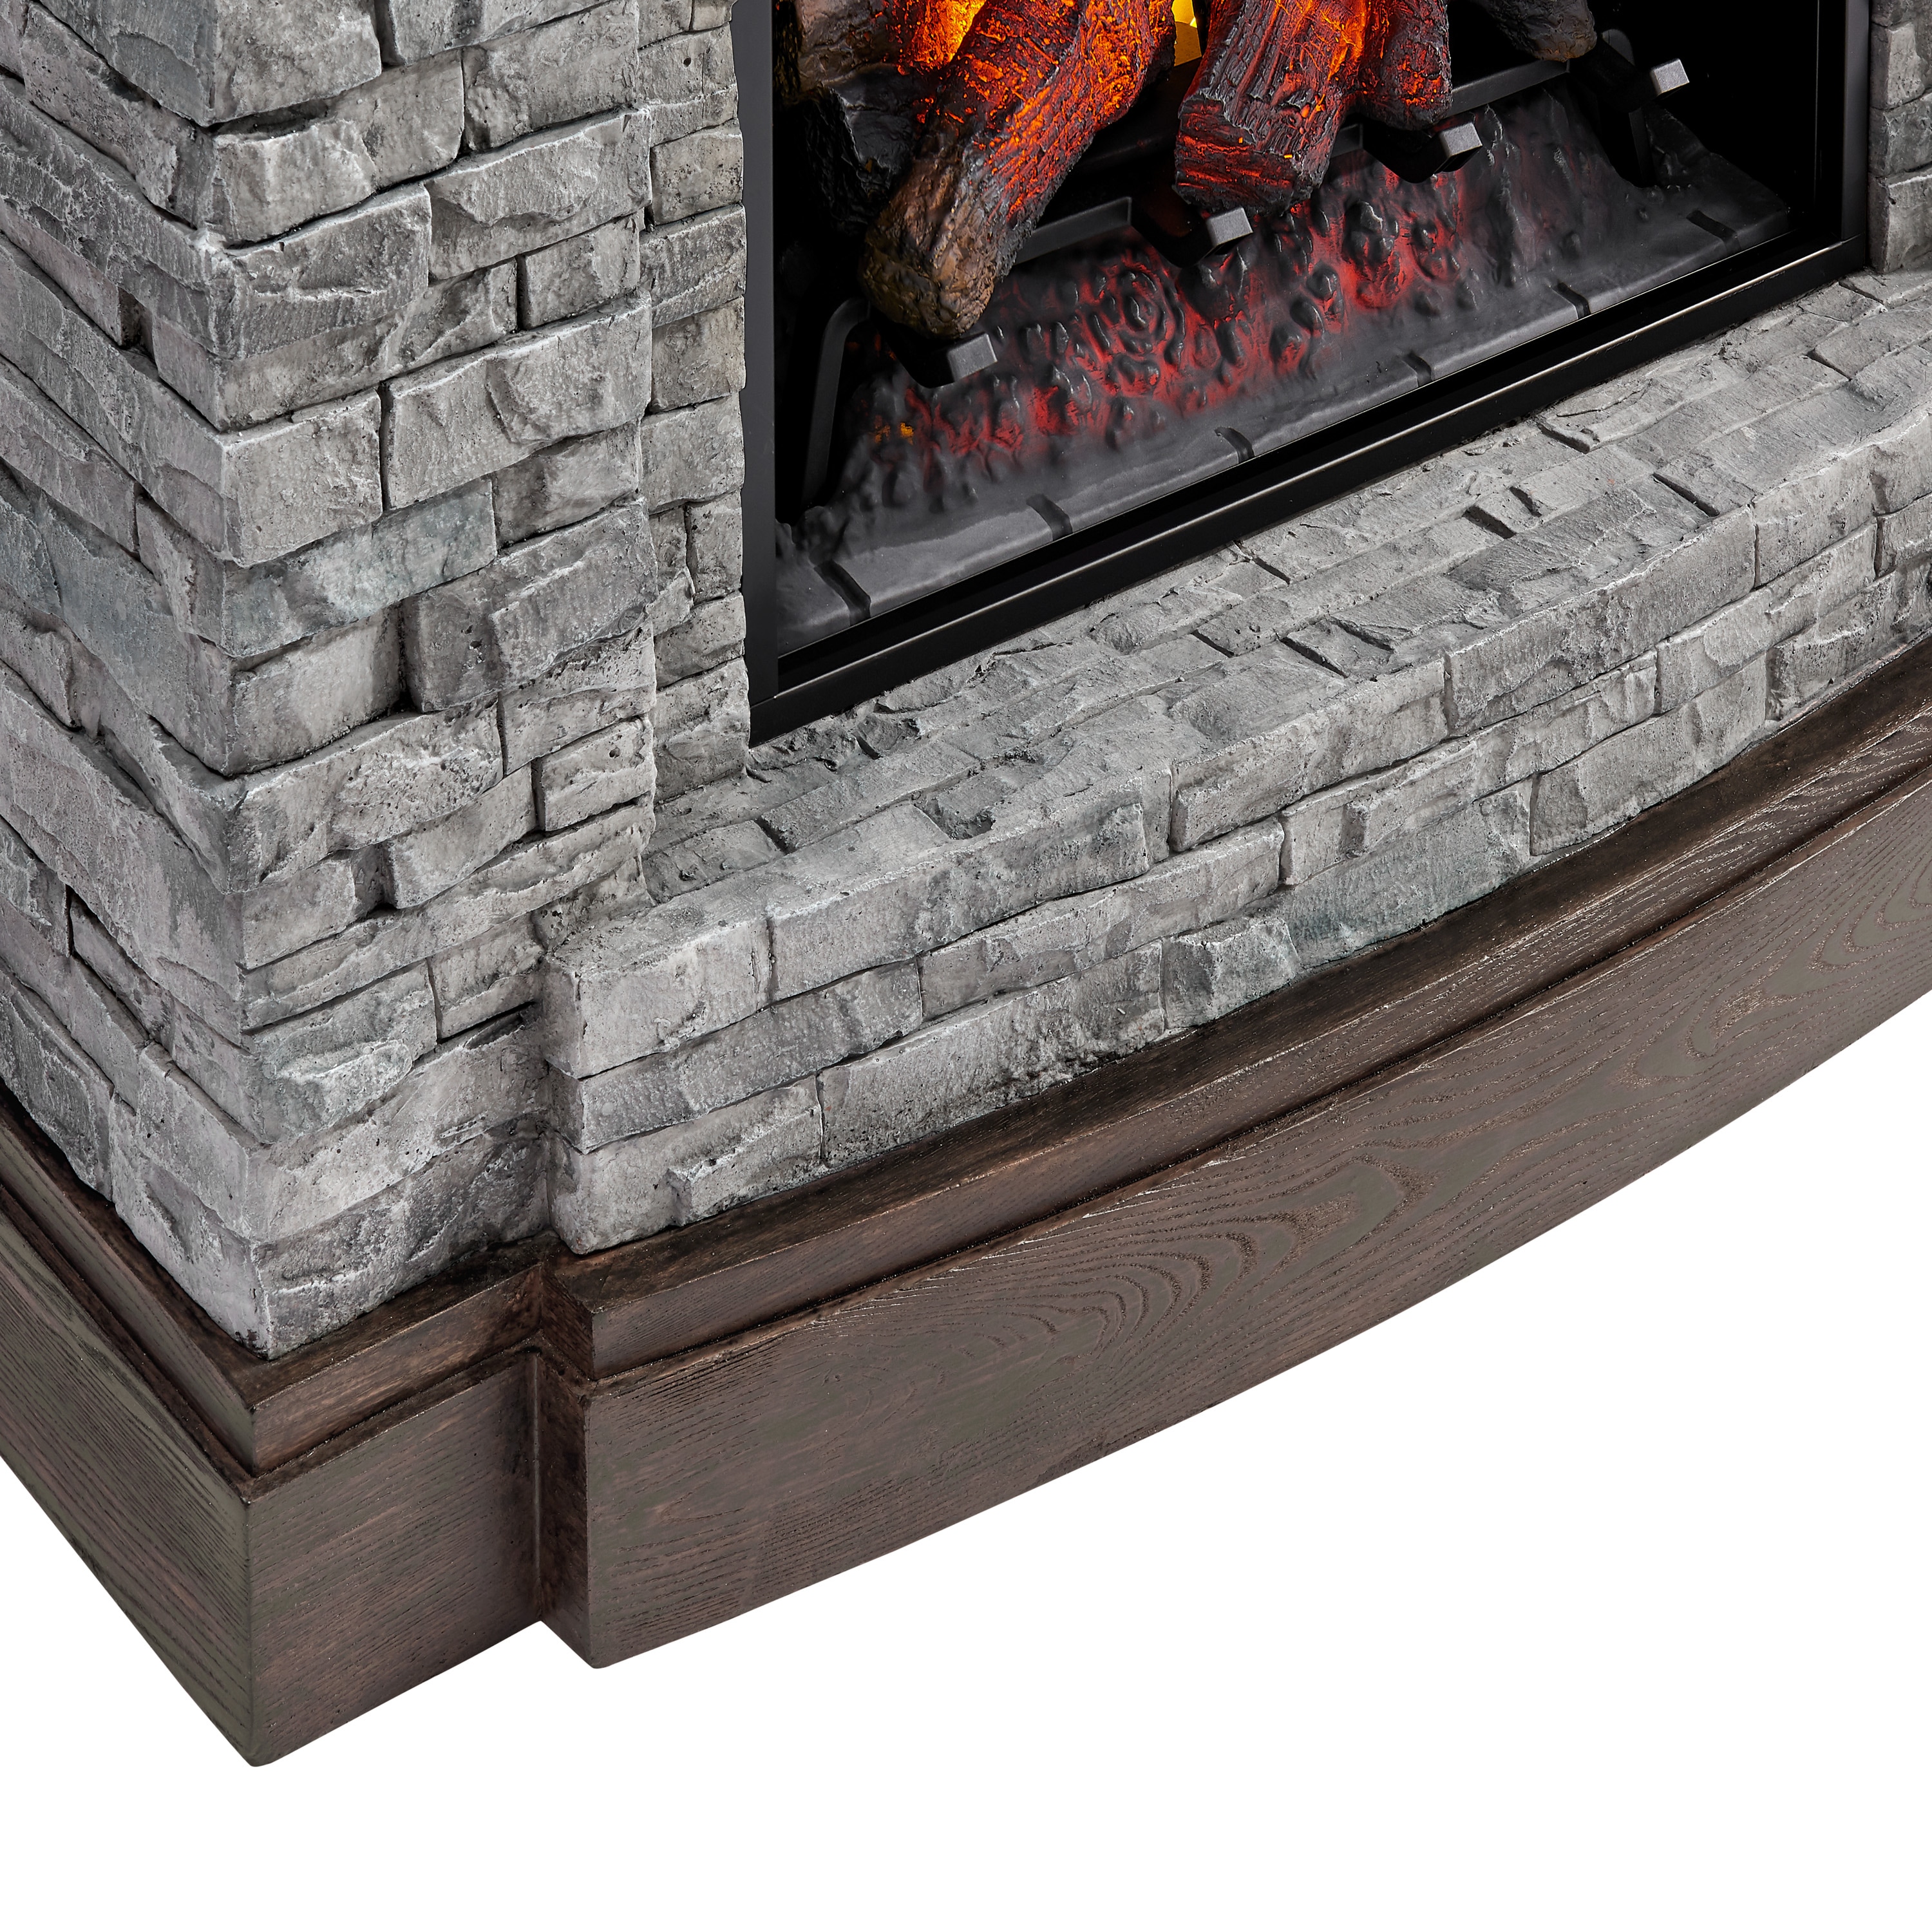 Electric fireplace with gray stone effect Tigullio 00178